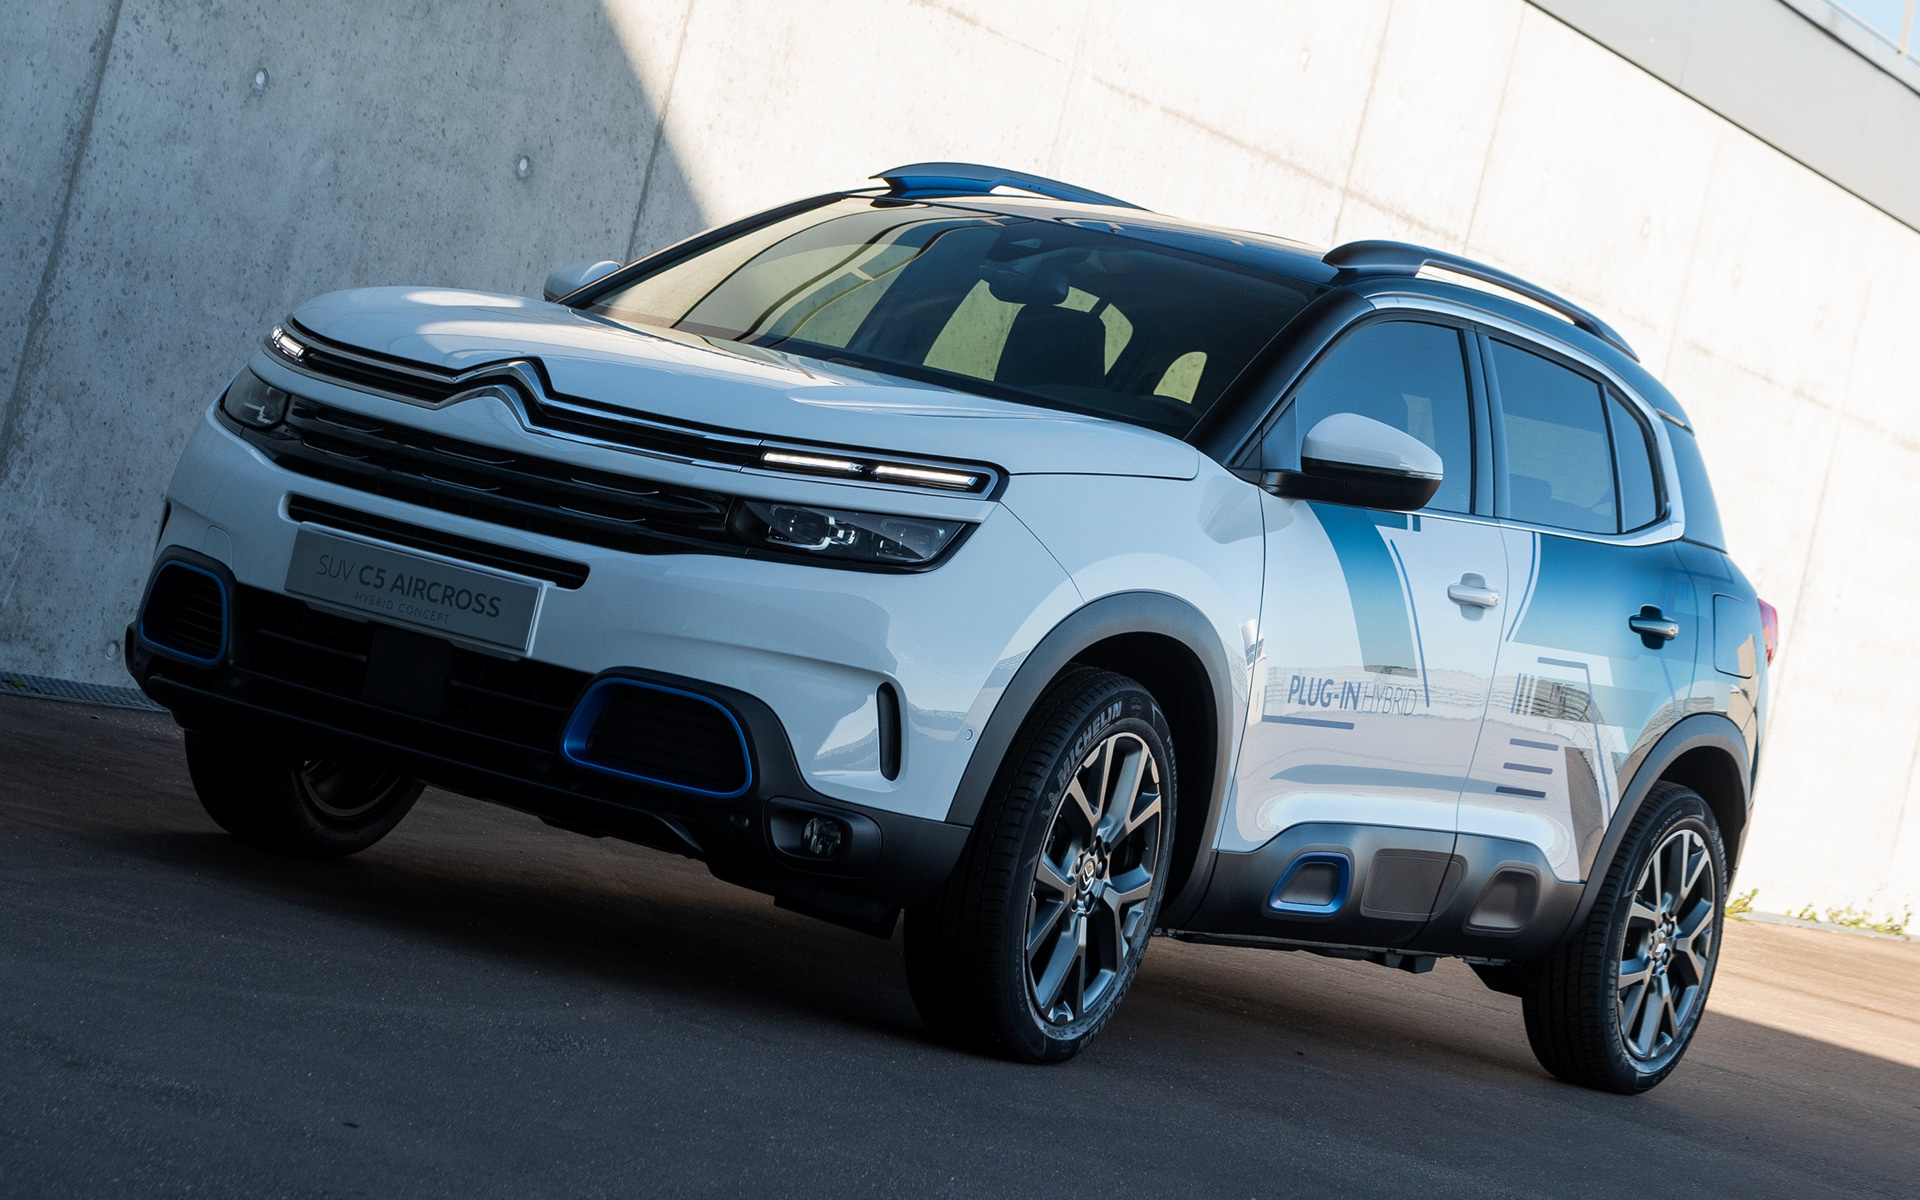 2018 Citroen C5 Aircross SUV Hybrid Concept - Wallpapers and HD Images | Car Pixel